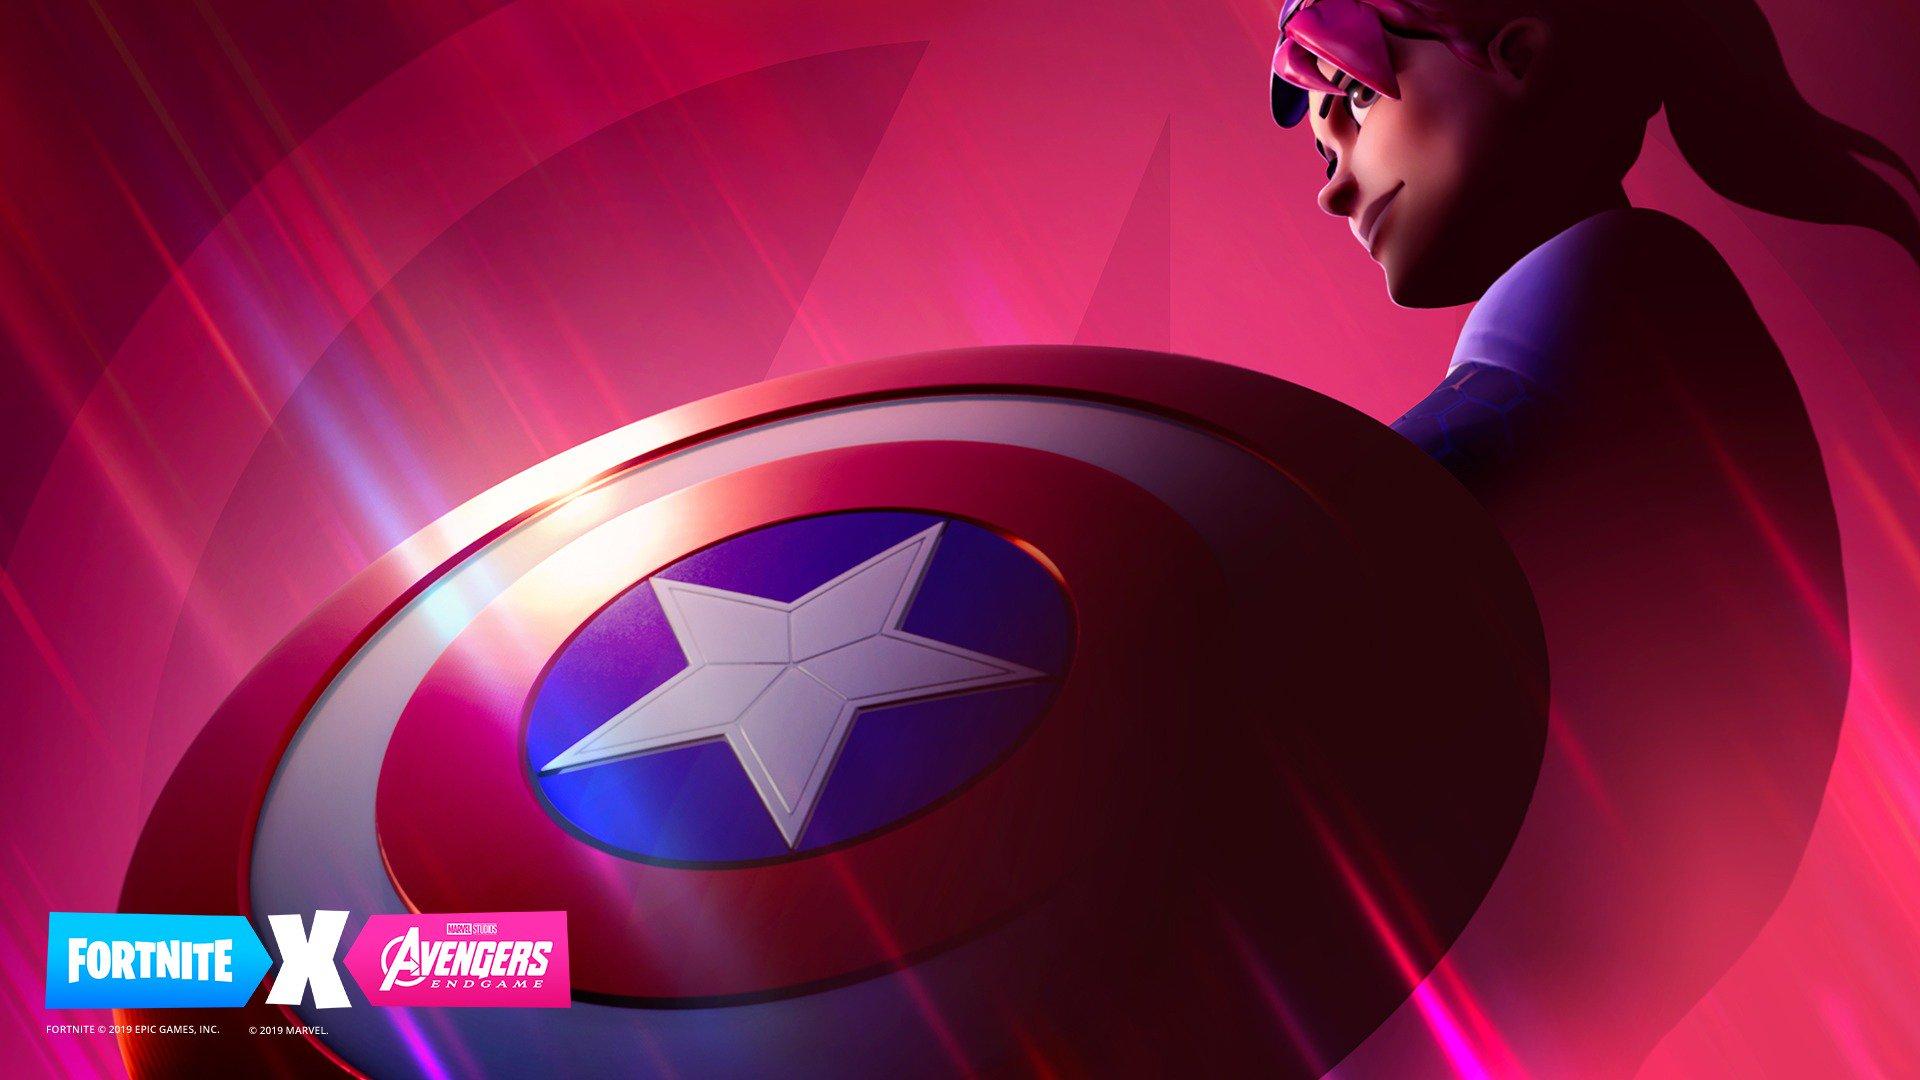 Fortnite Latest News Breaking Stories And Comment The Independent - fortnite and avengers launch mysterious crossover to celebrate endgame